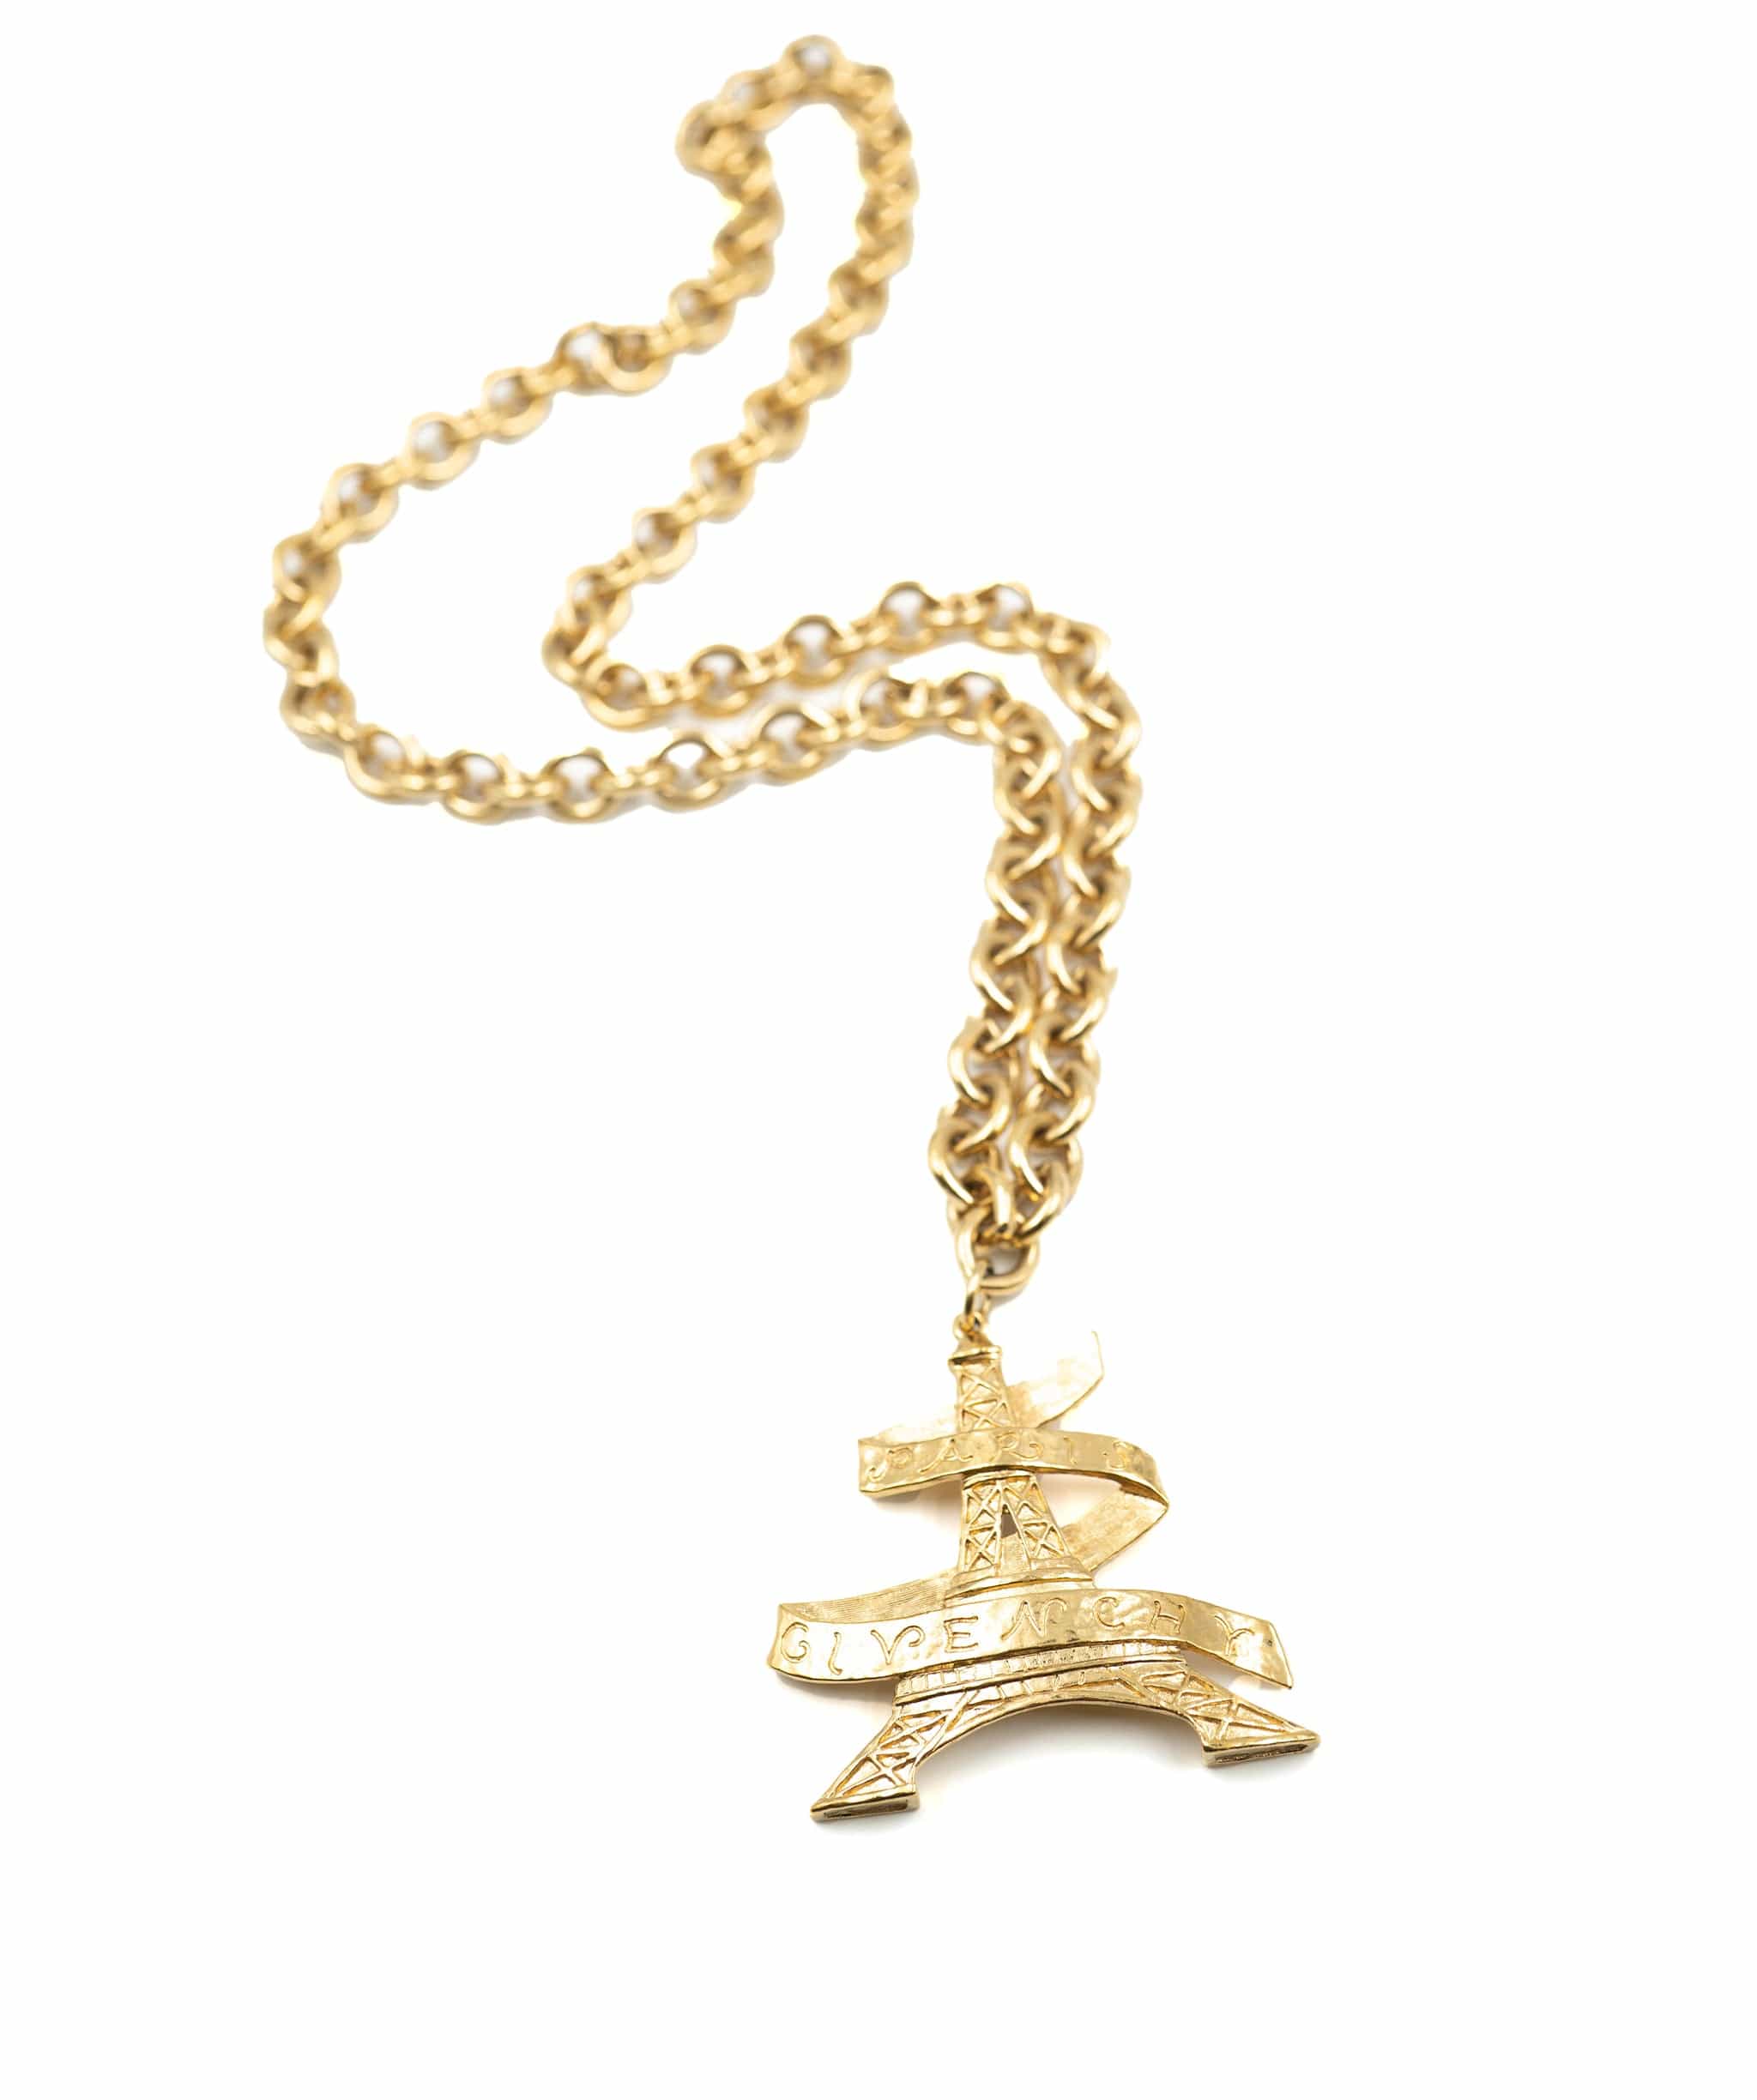 Givenchy Givenchy Eiffel tower top necklace - AWL3628